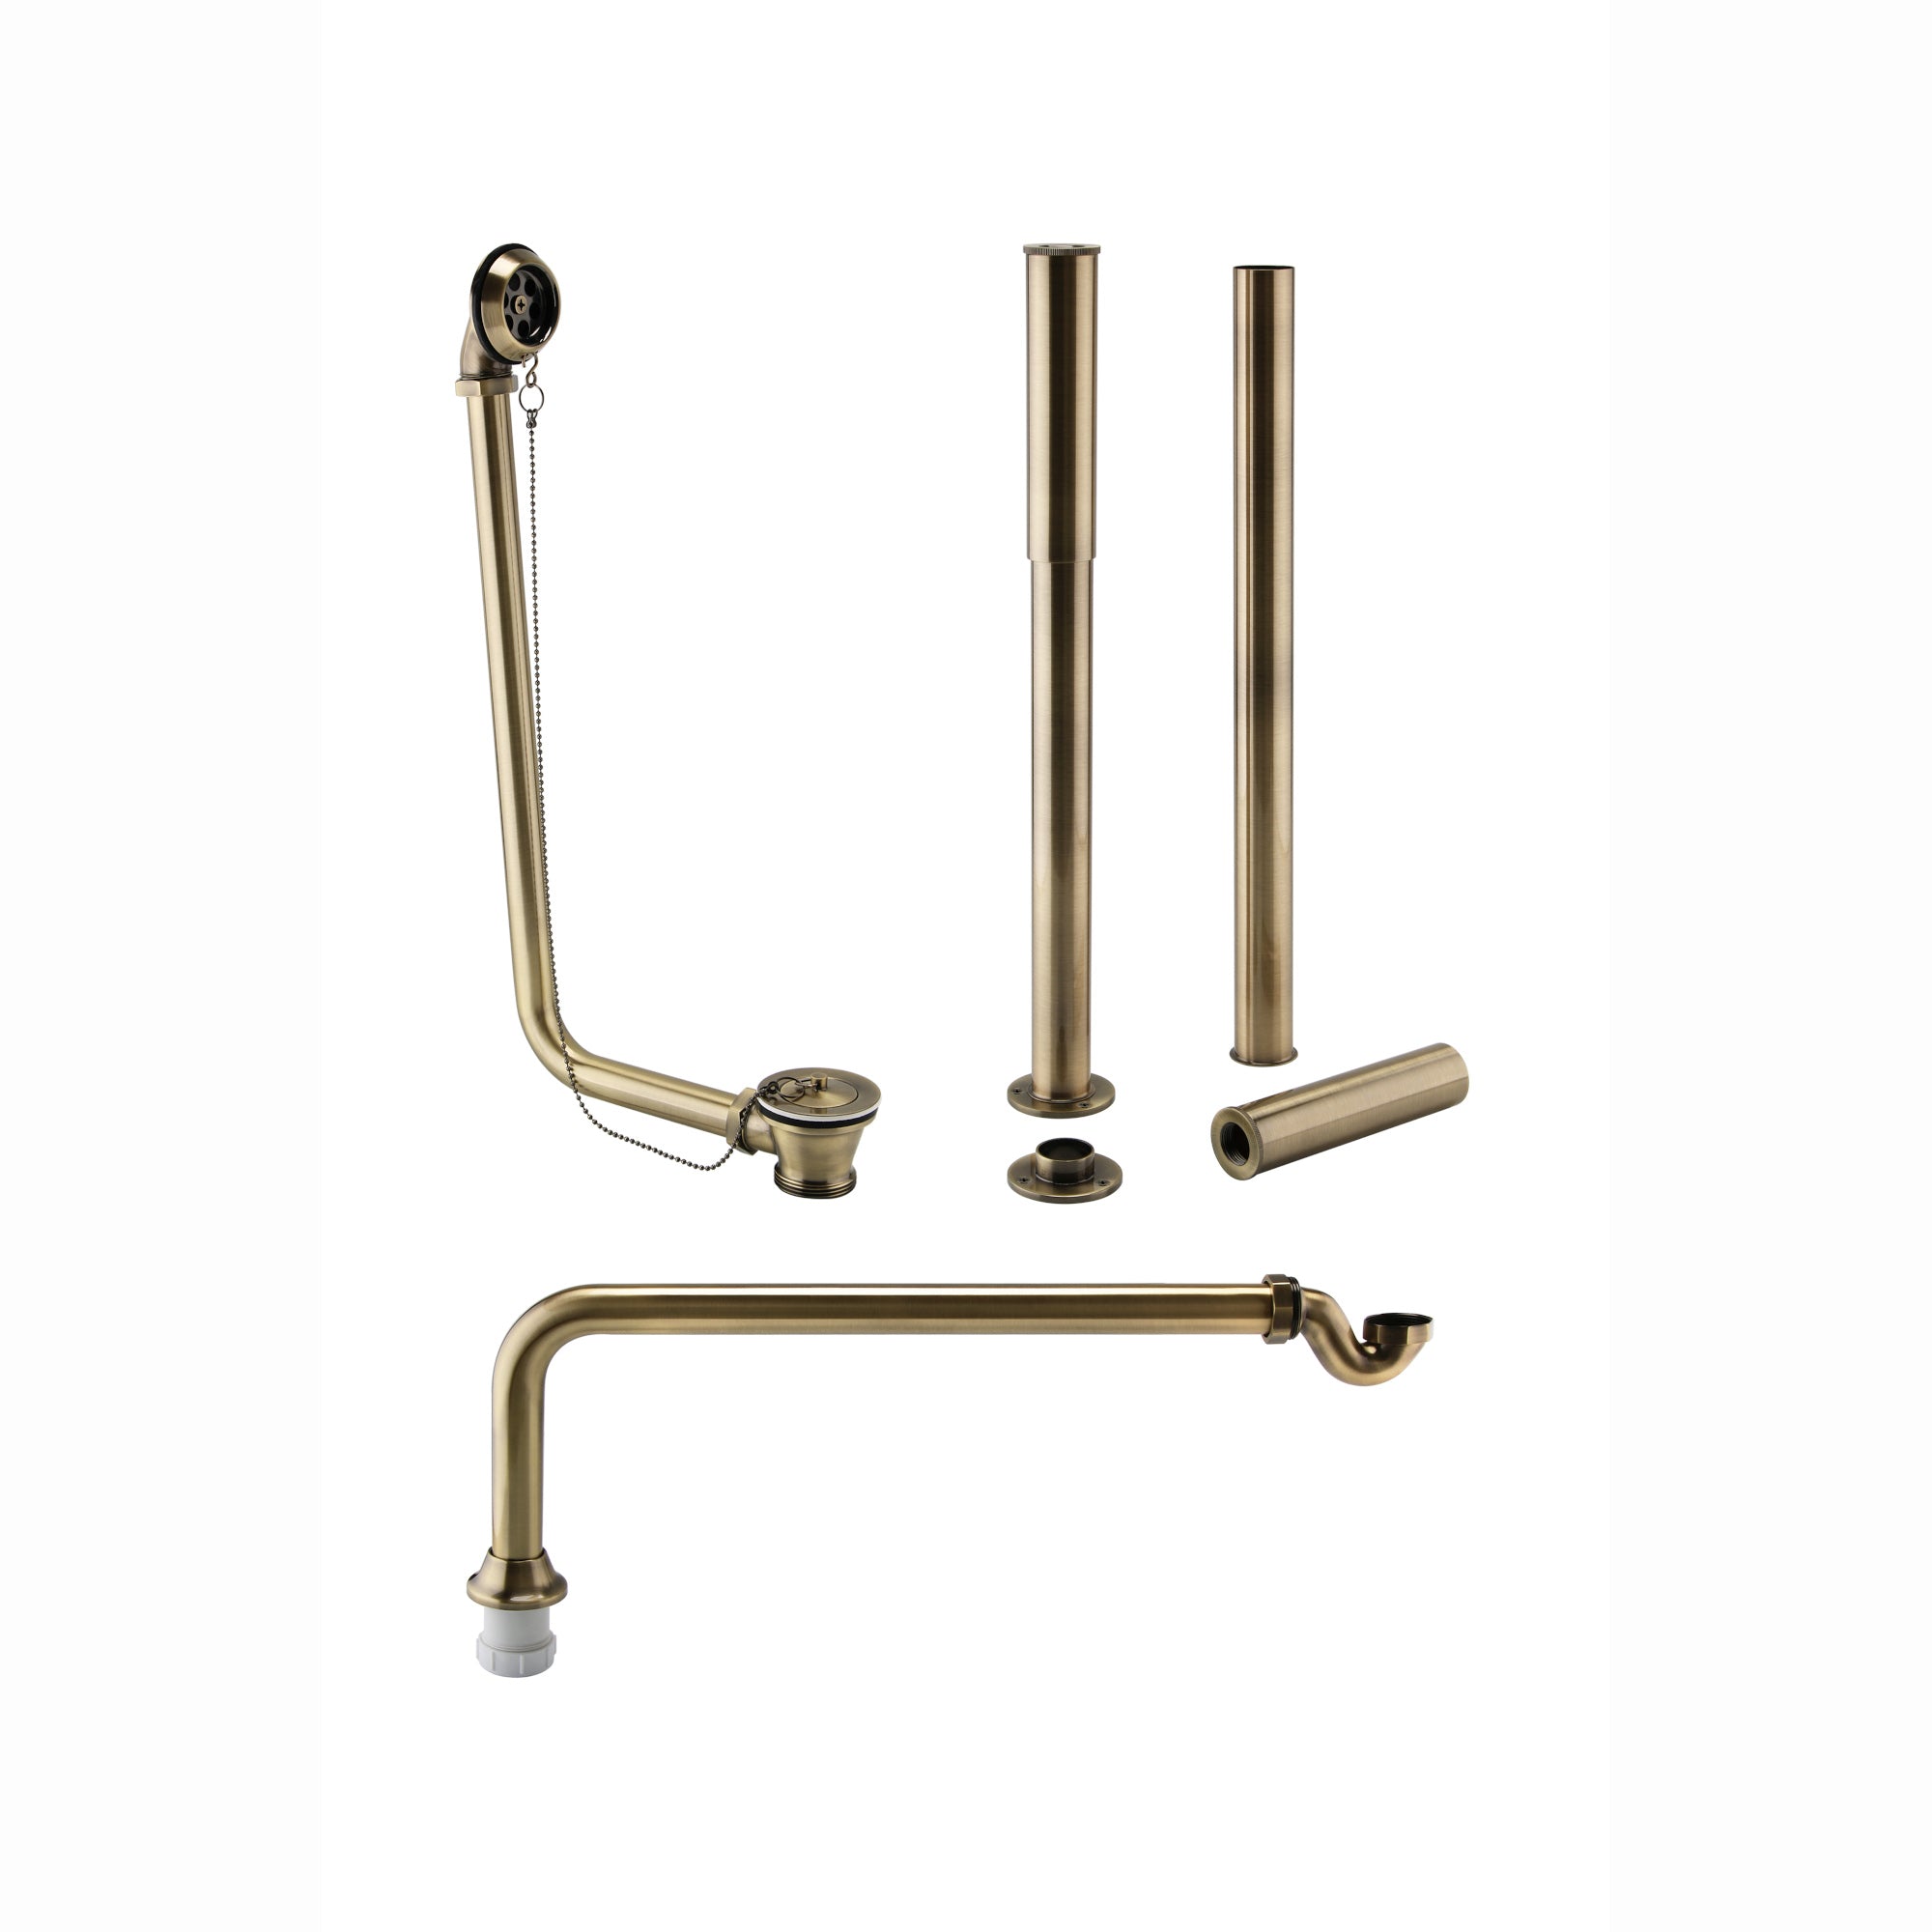 Roll top bath pack incl. exposed bath waste, shrouds and bath trap - antique bronze